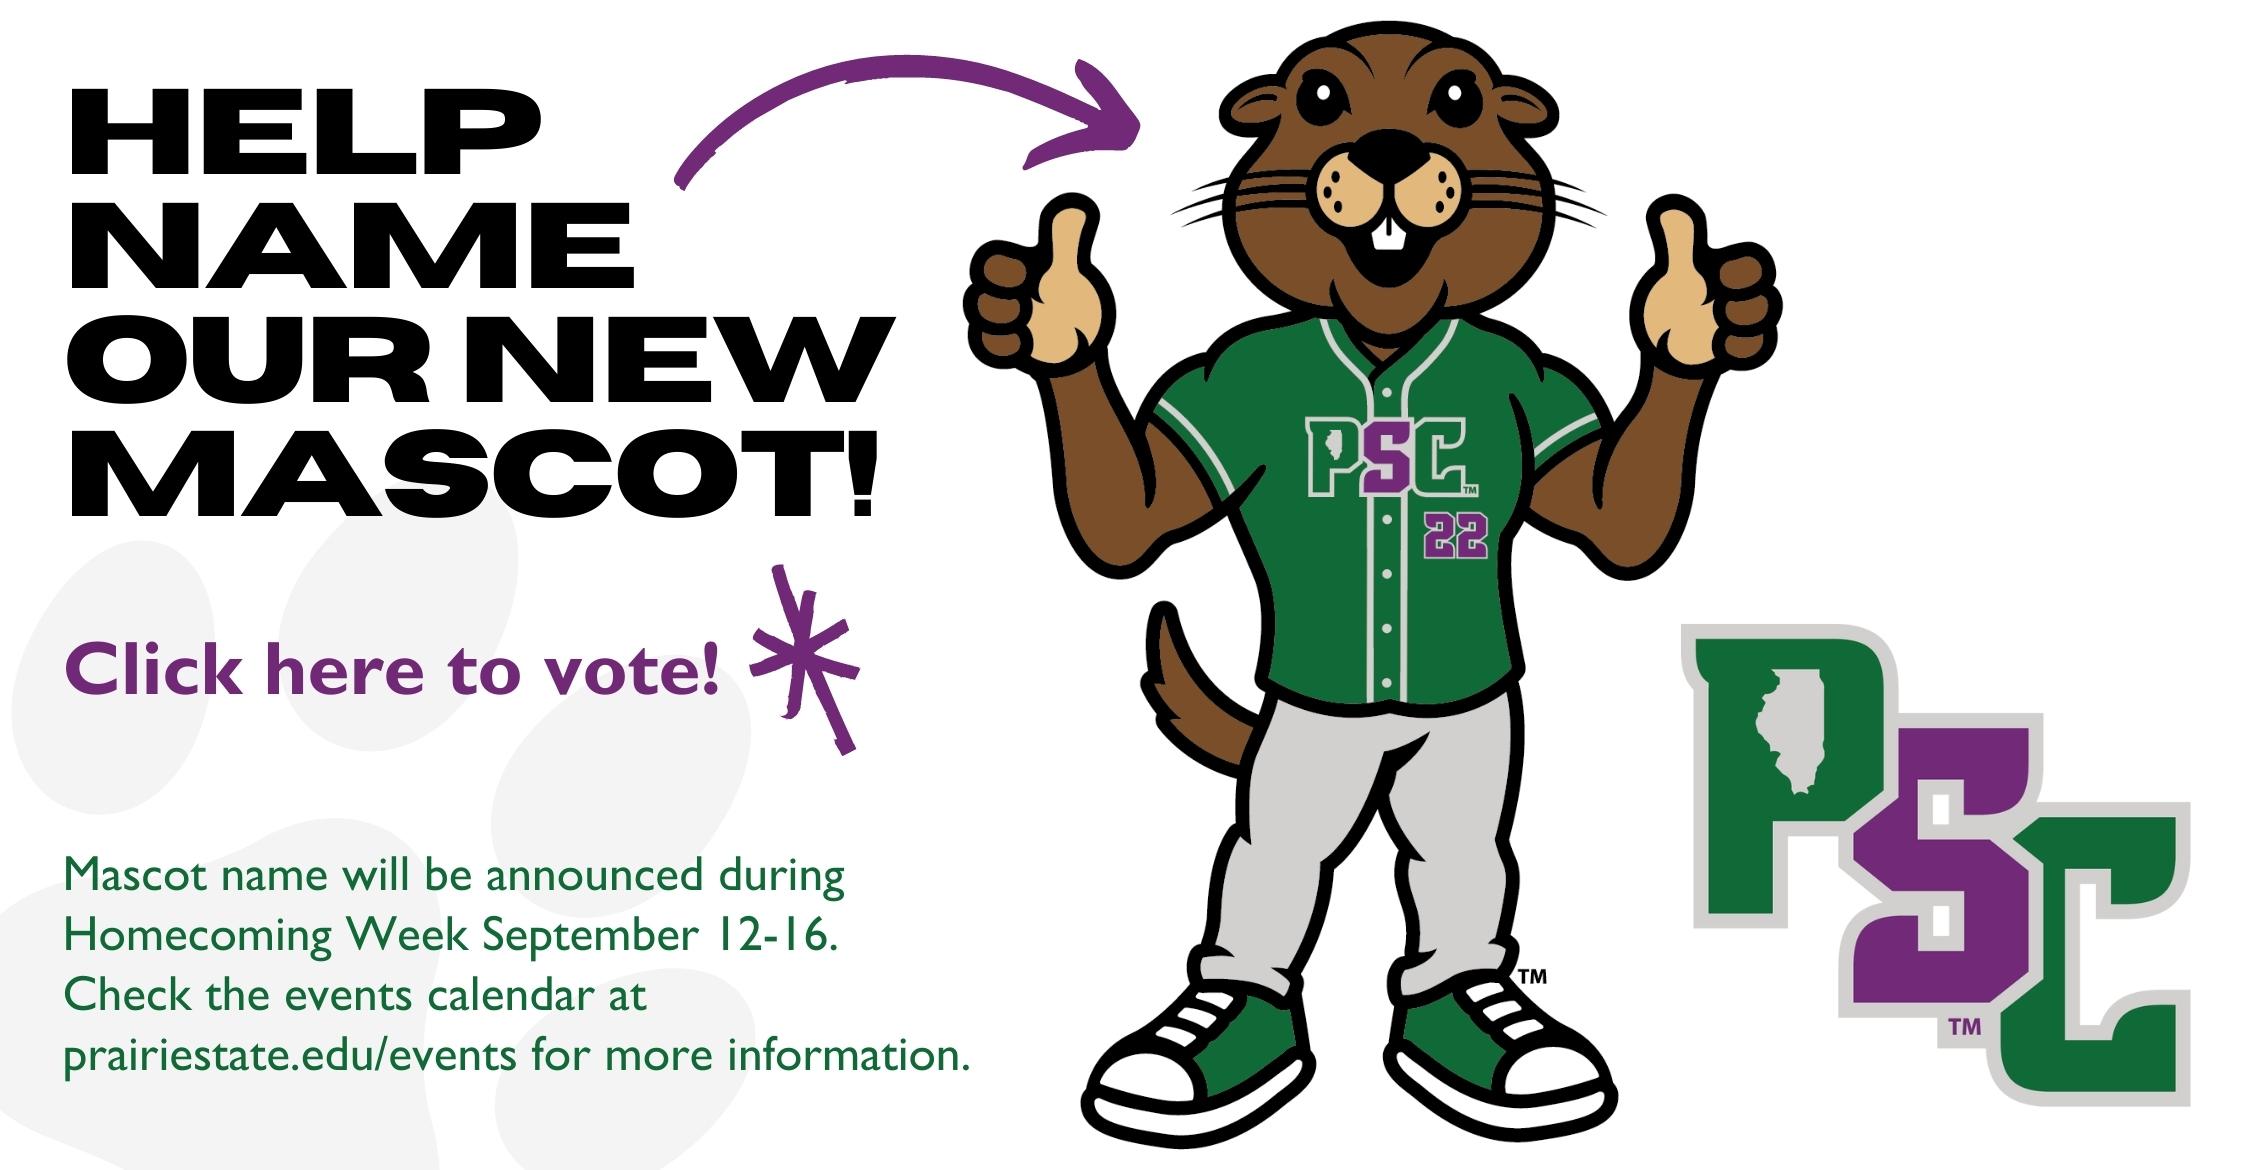 Help name our new mascot!